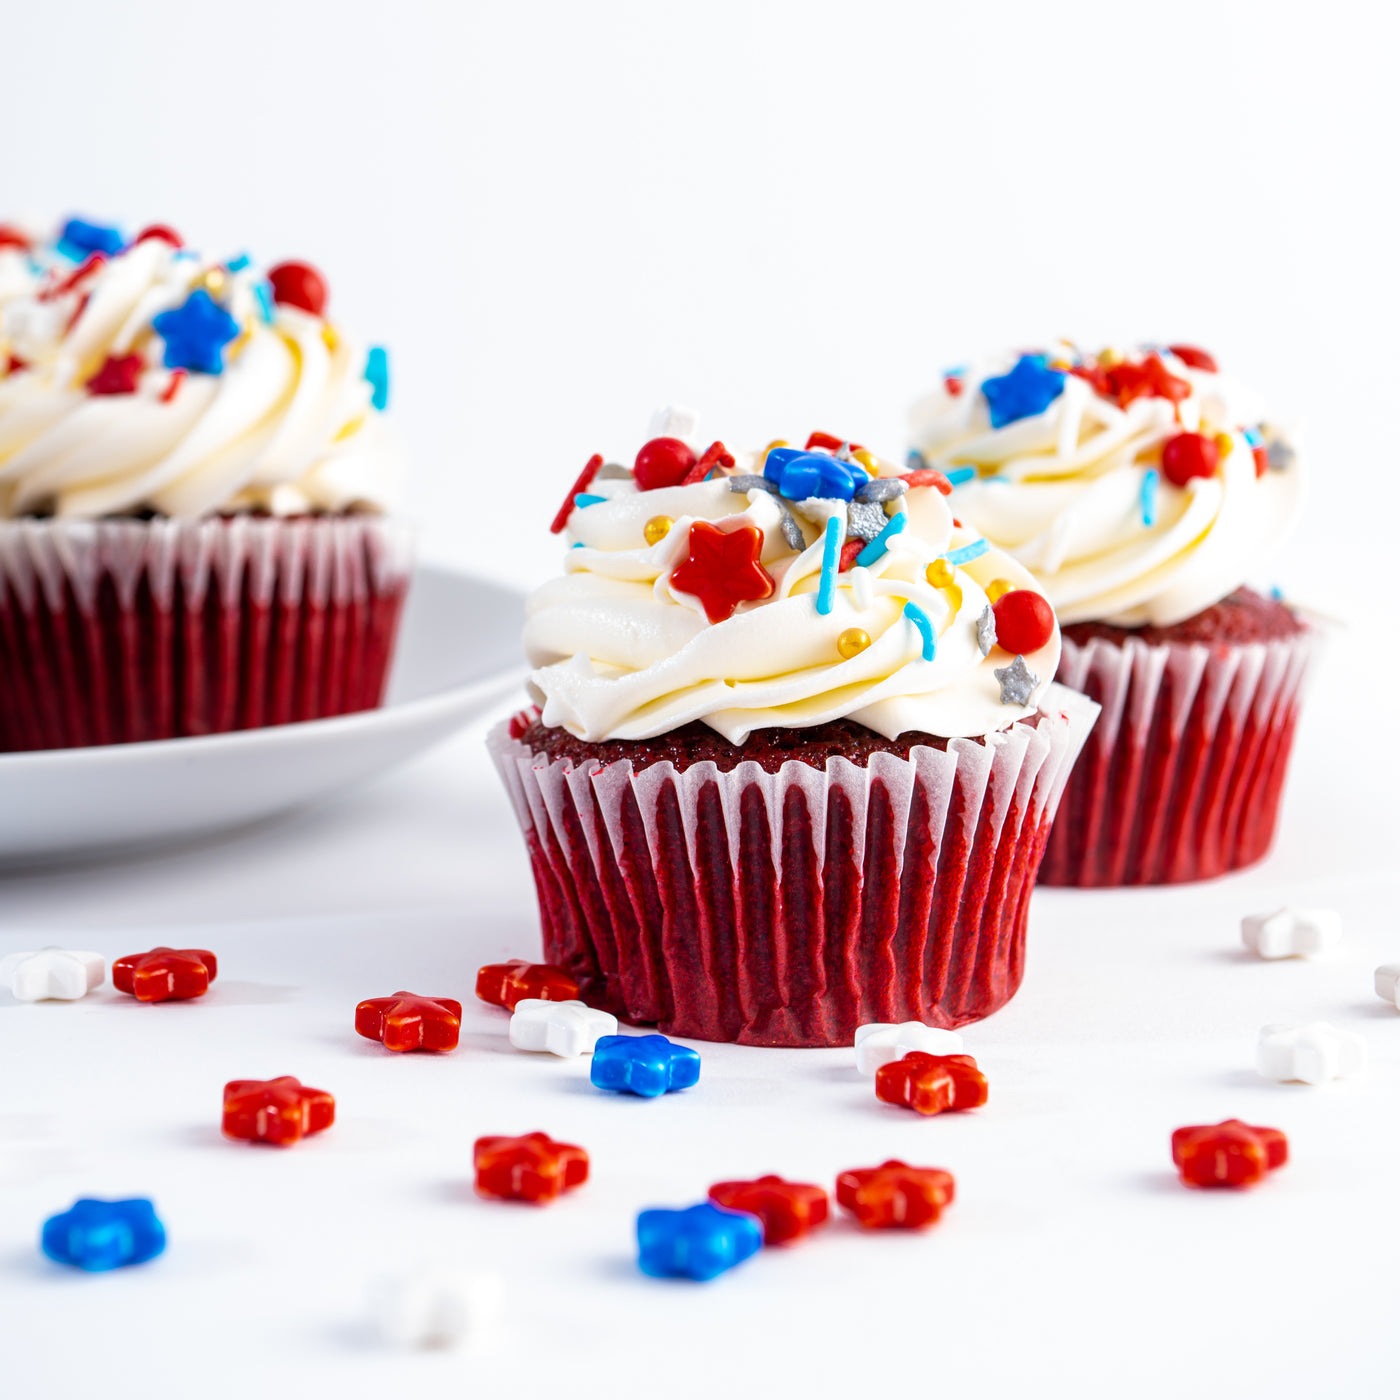 4th of July Cupcakes - Sweet E's Bake Shop - The Cake Shop